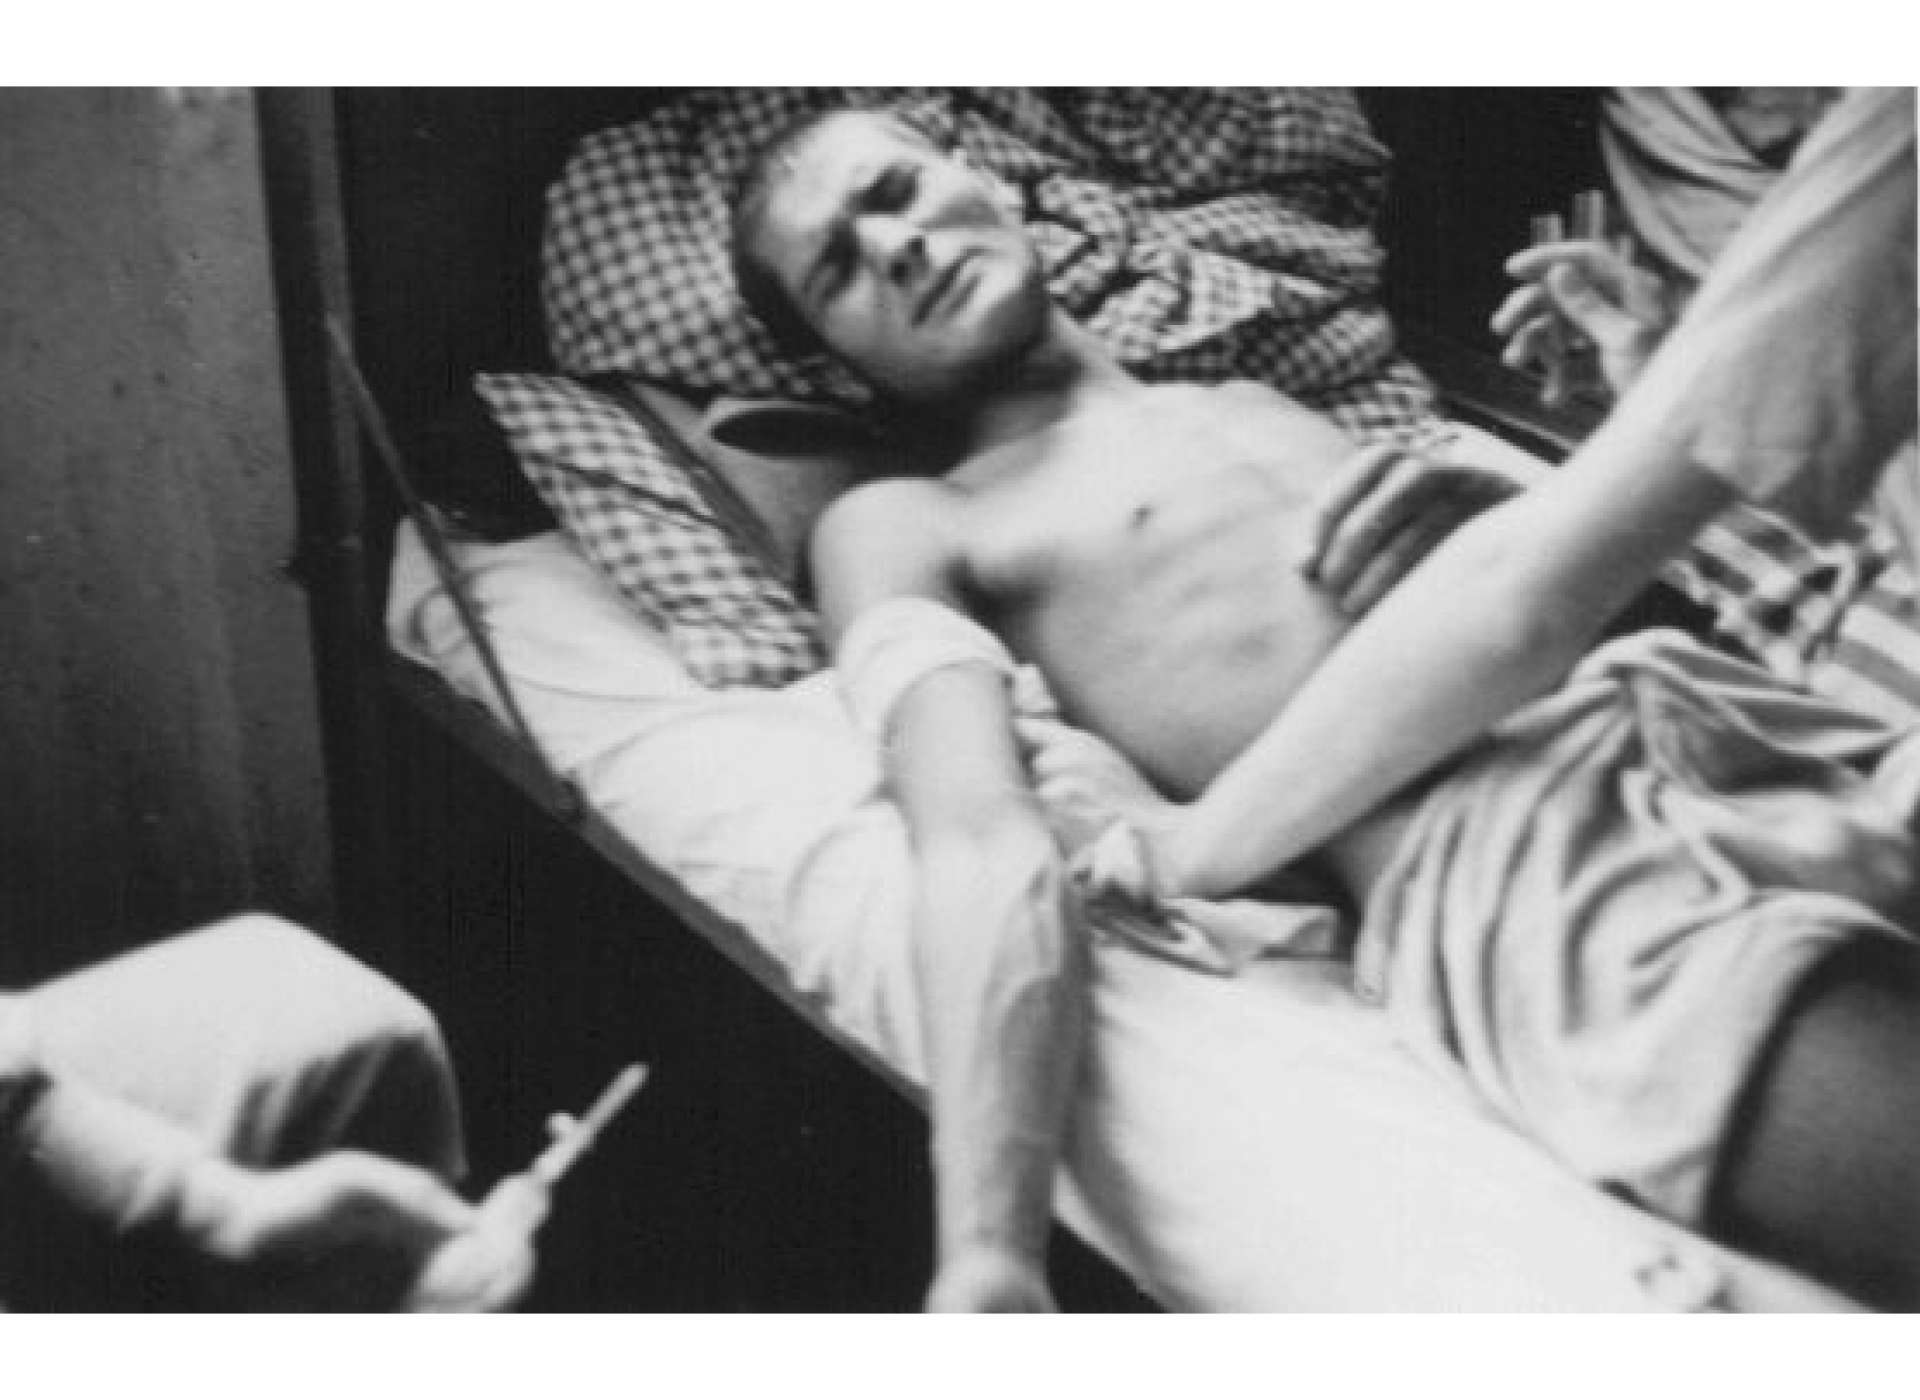 Romani victim of Nazi medical experiments to make seawater drinkable. Dachau, 1944. Credit: National Archives and Records Administration, College Park, Maryland. Courtesy of the United States Holocaust Memorial Museum.